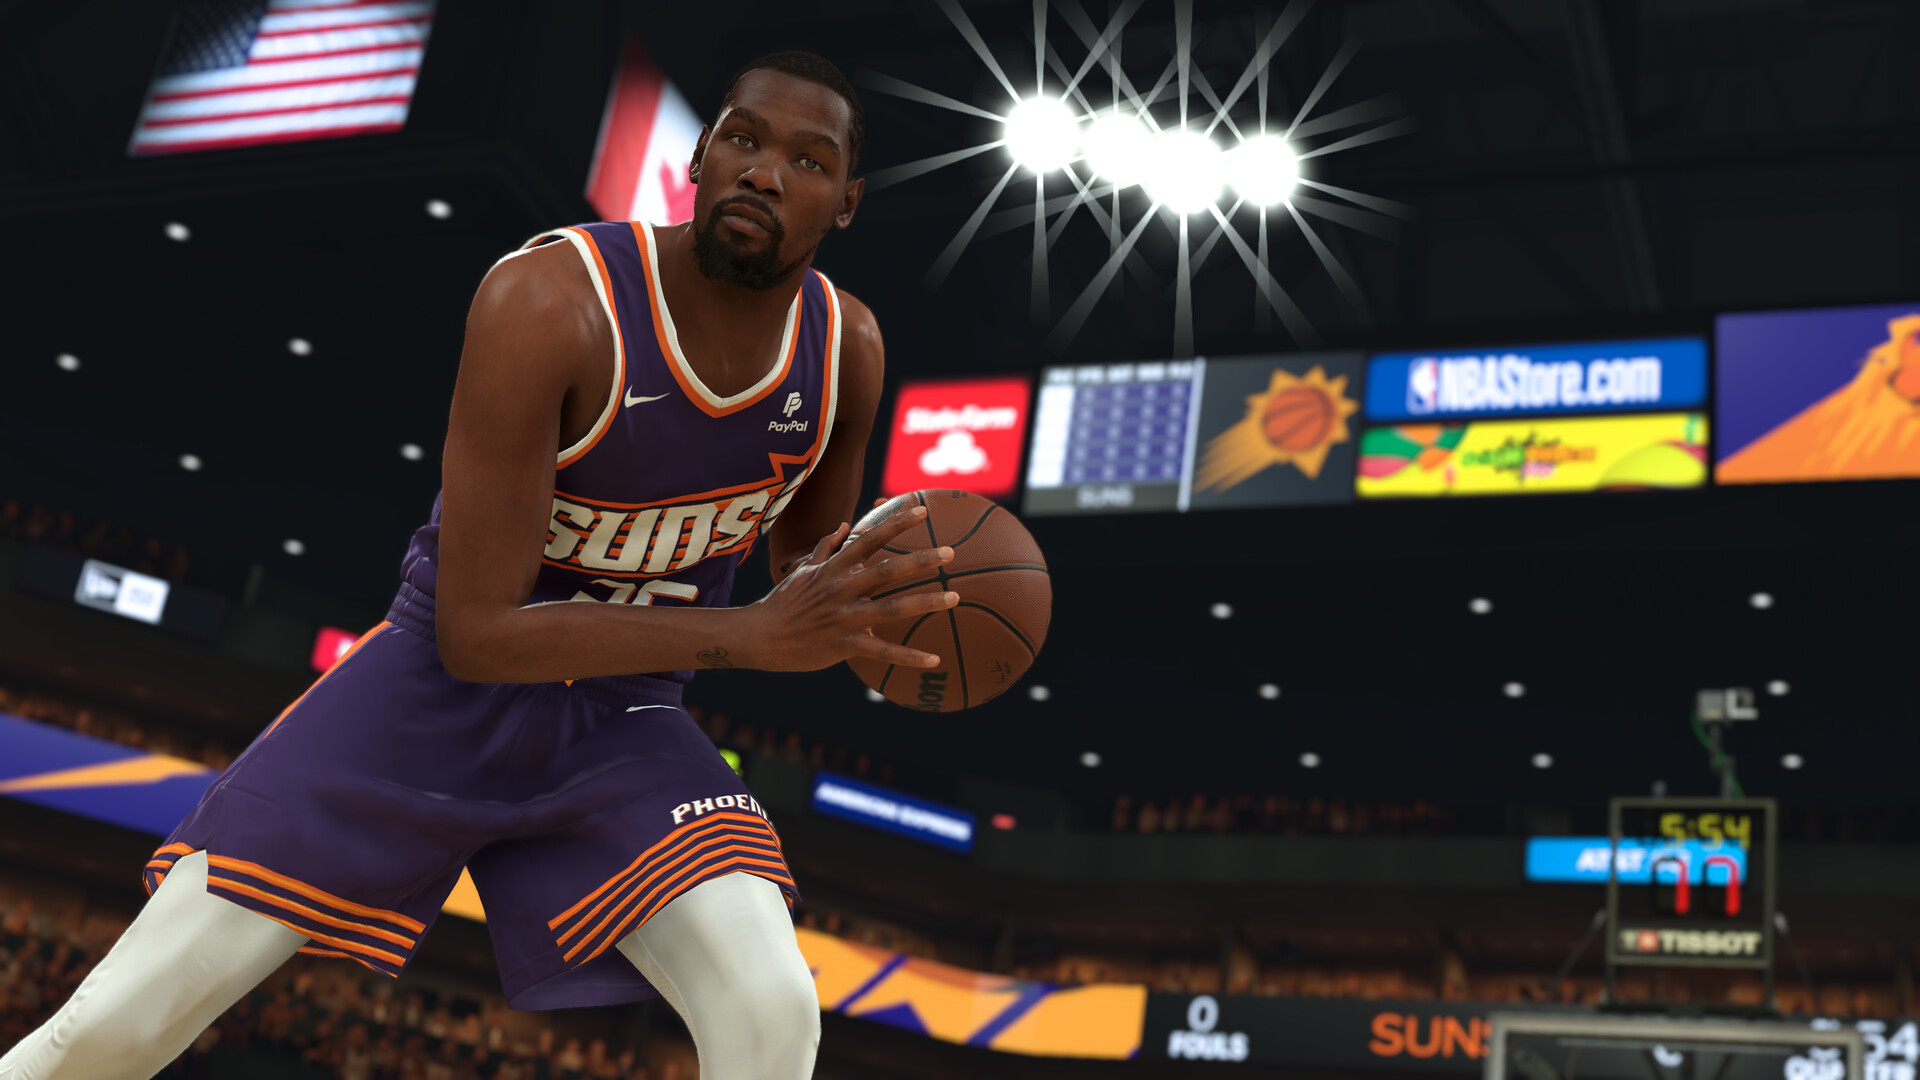 NBA 2K24 brought few new features other than updating squads and players